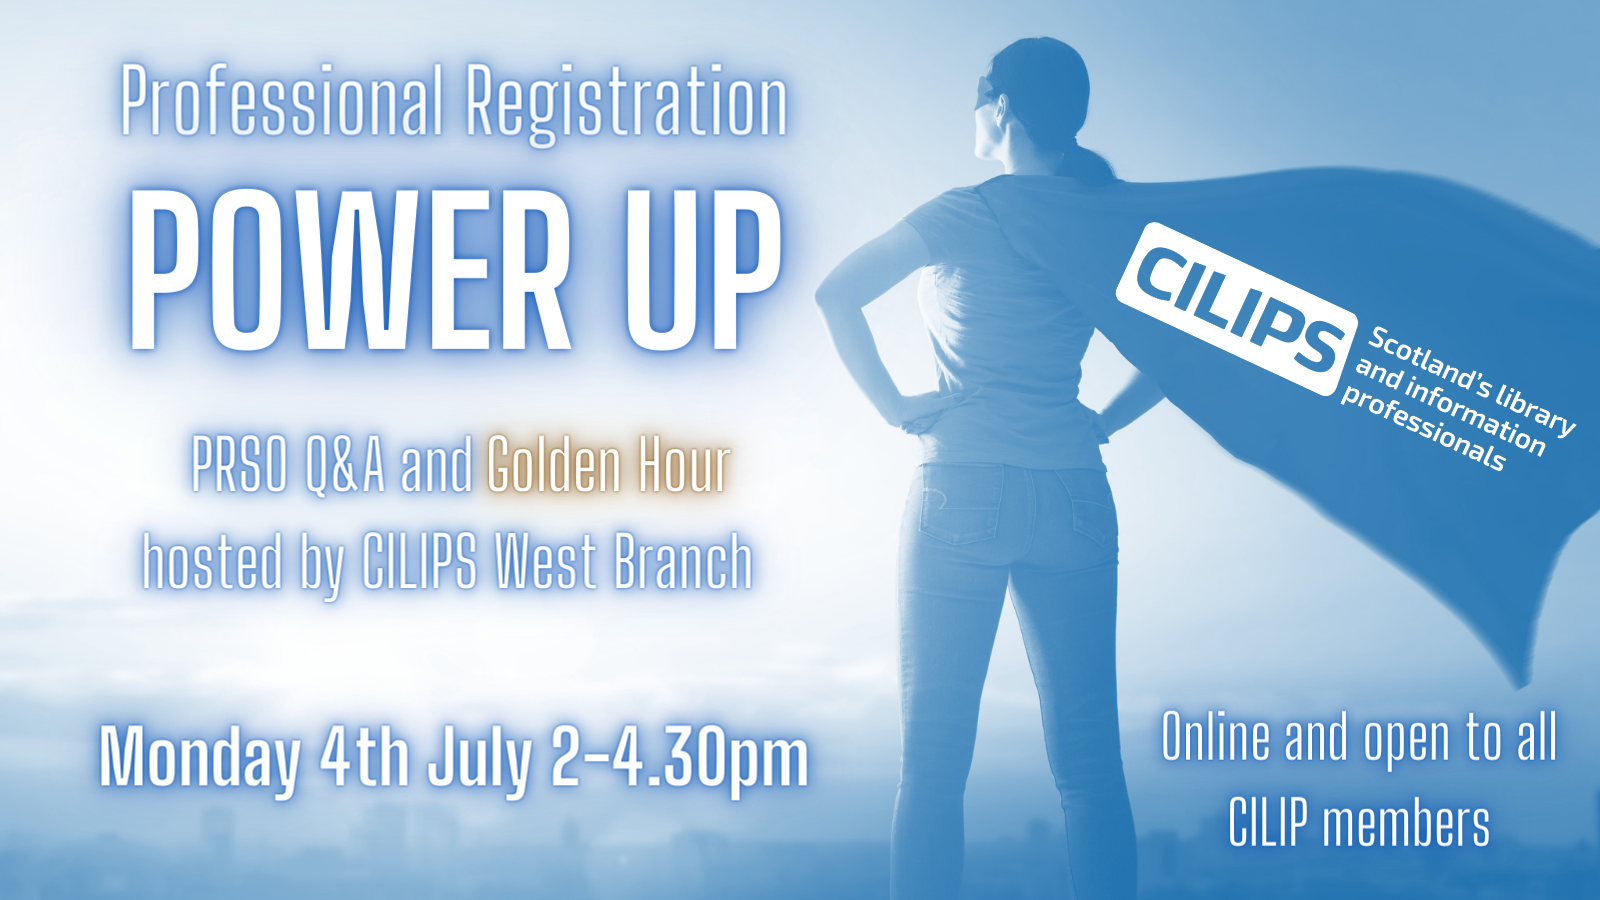 The event logo for Professional Registration Power Up, taking place online on 4th July 2-4.30pm, showing a woman watching a sunrise while wearing a superhero cape.